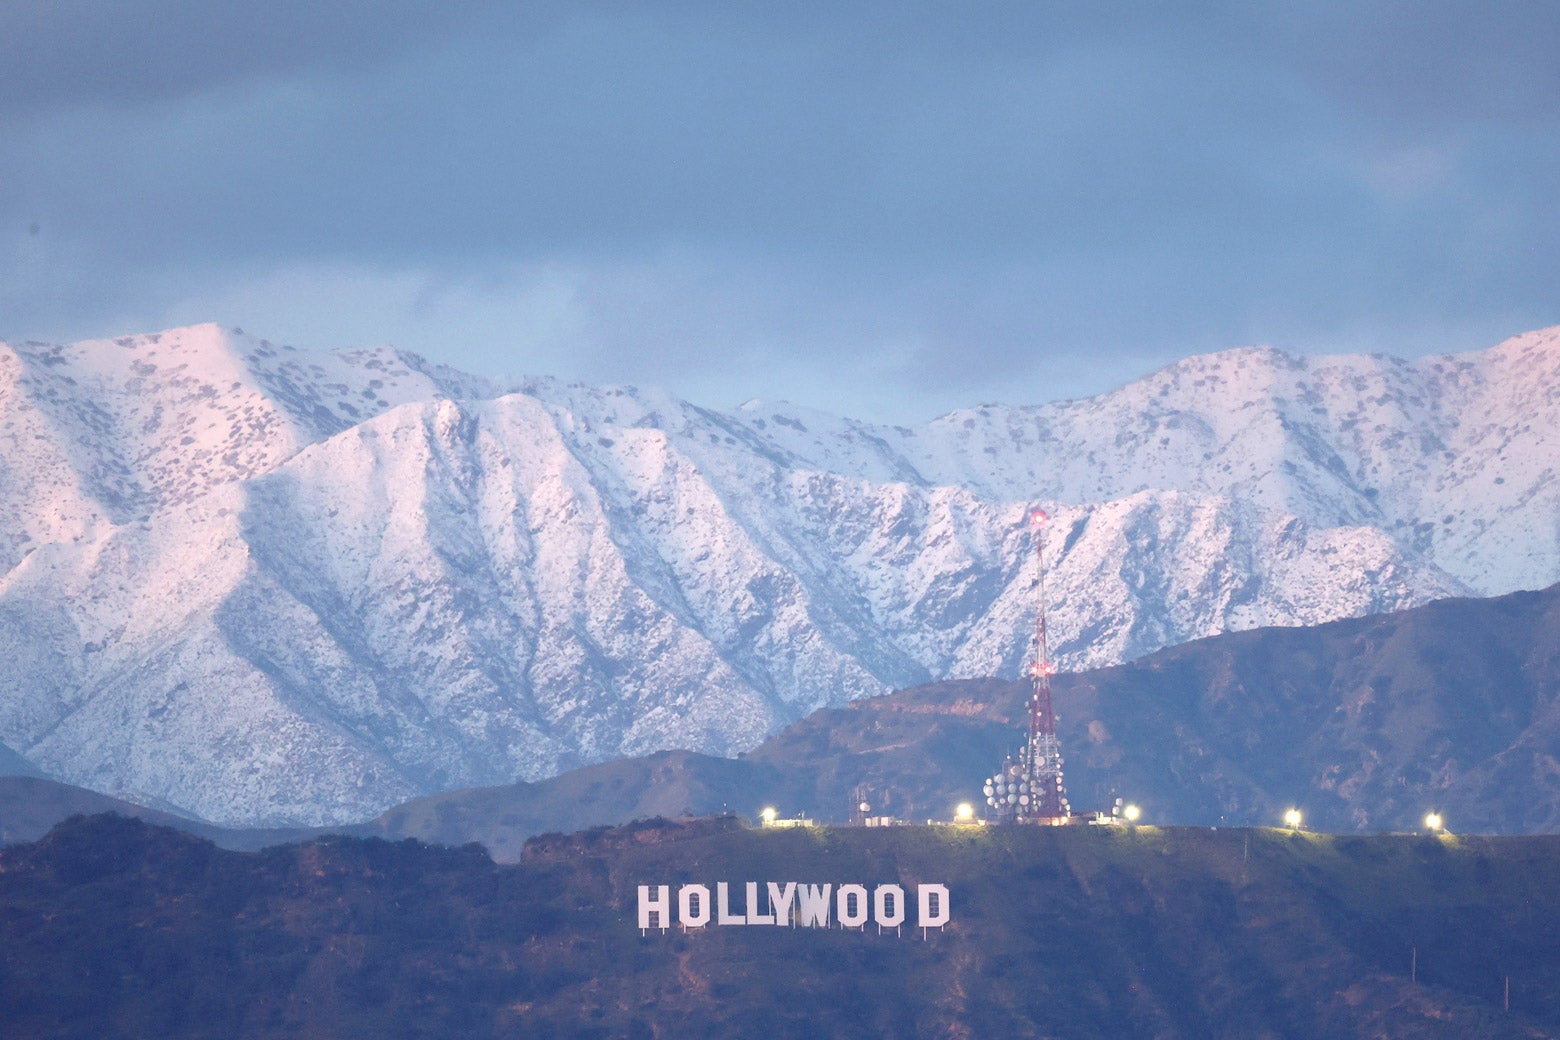 Snow on the mountains behind the Hollywood sign in L.A.